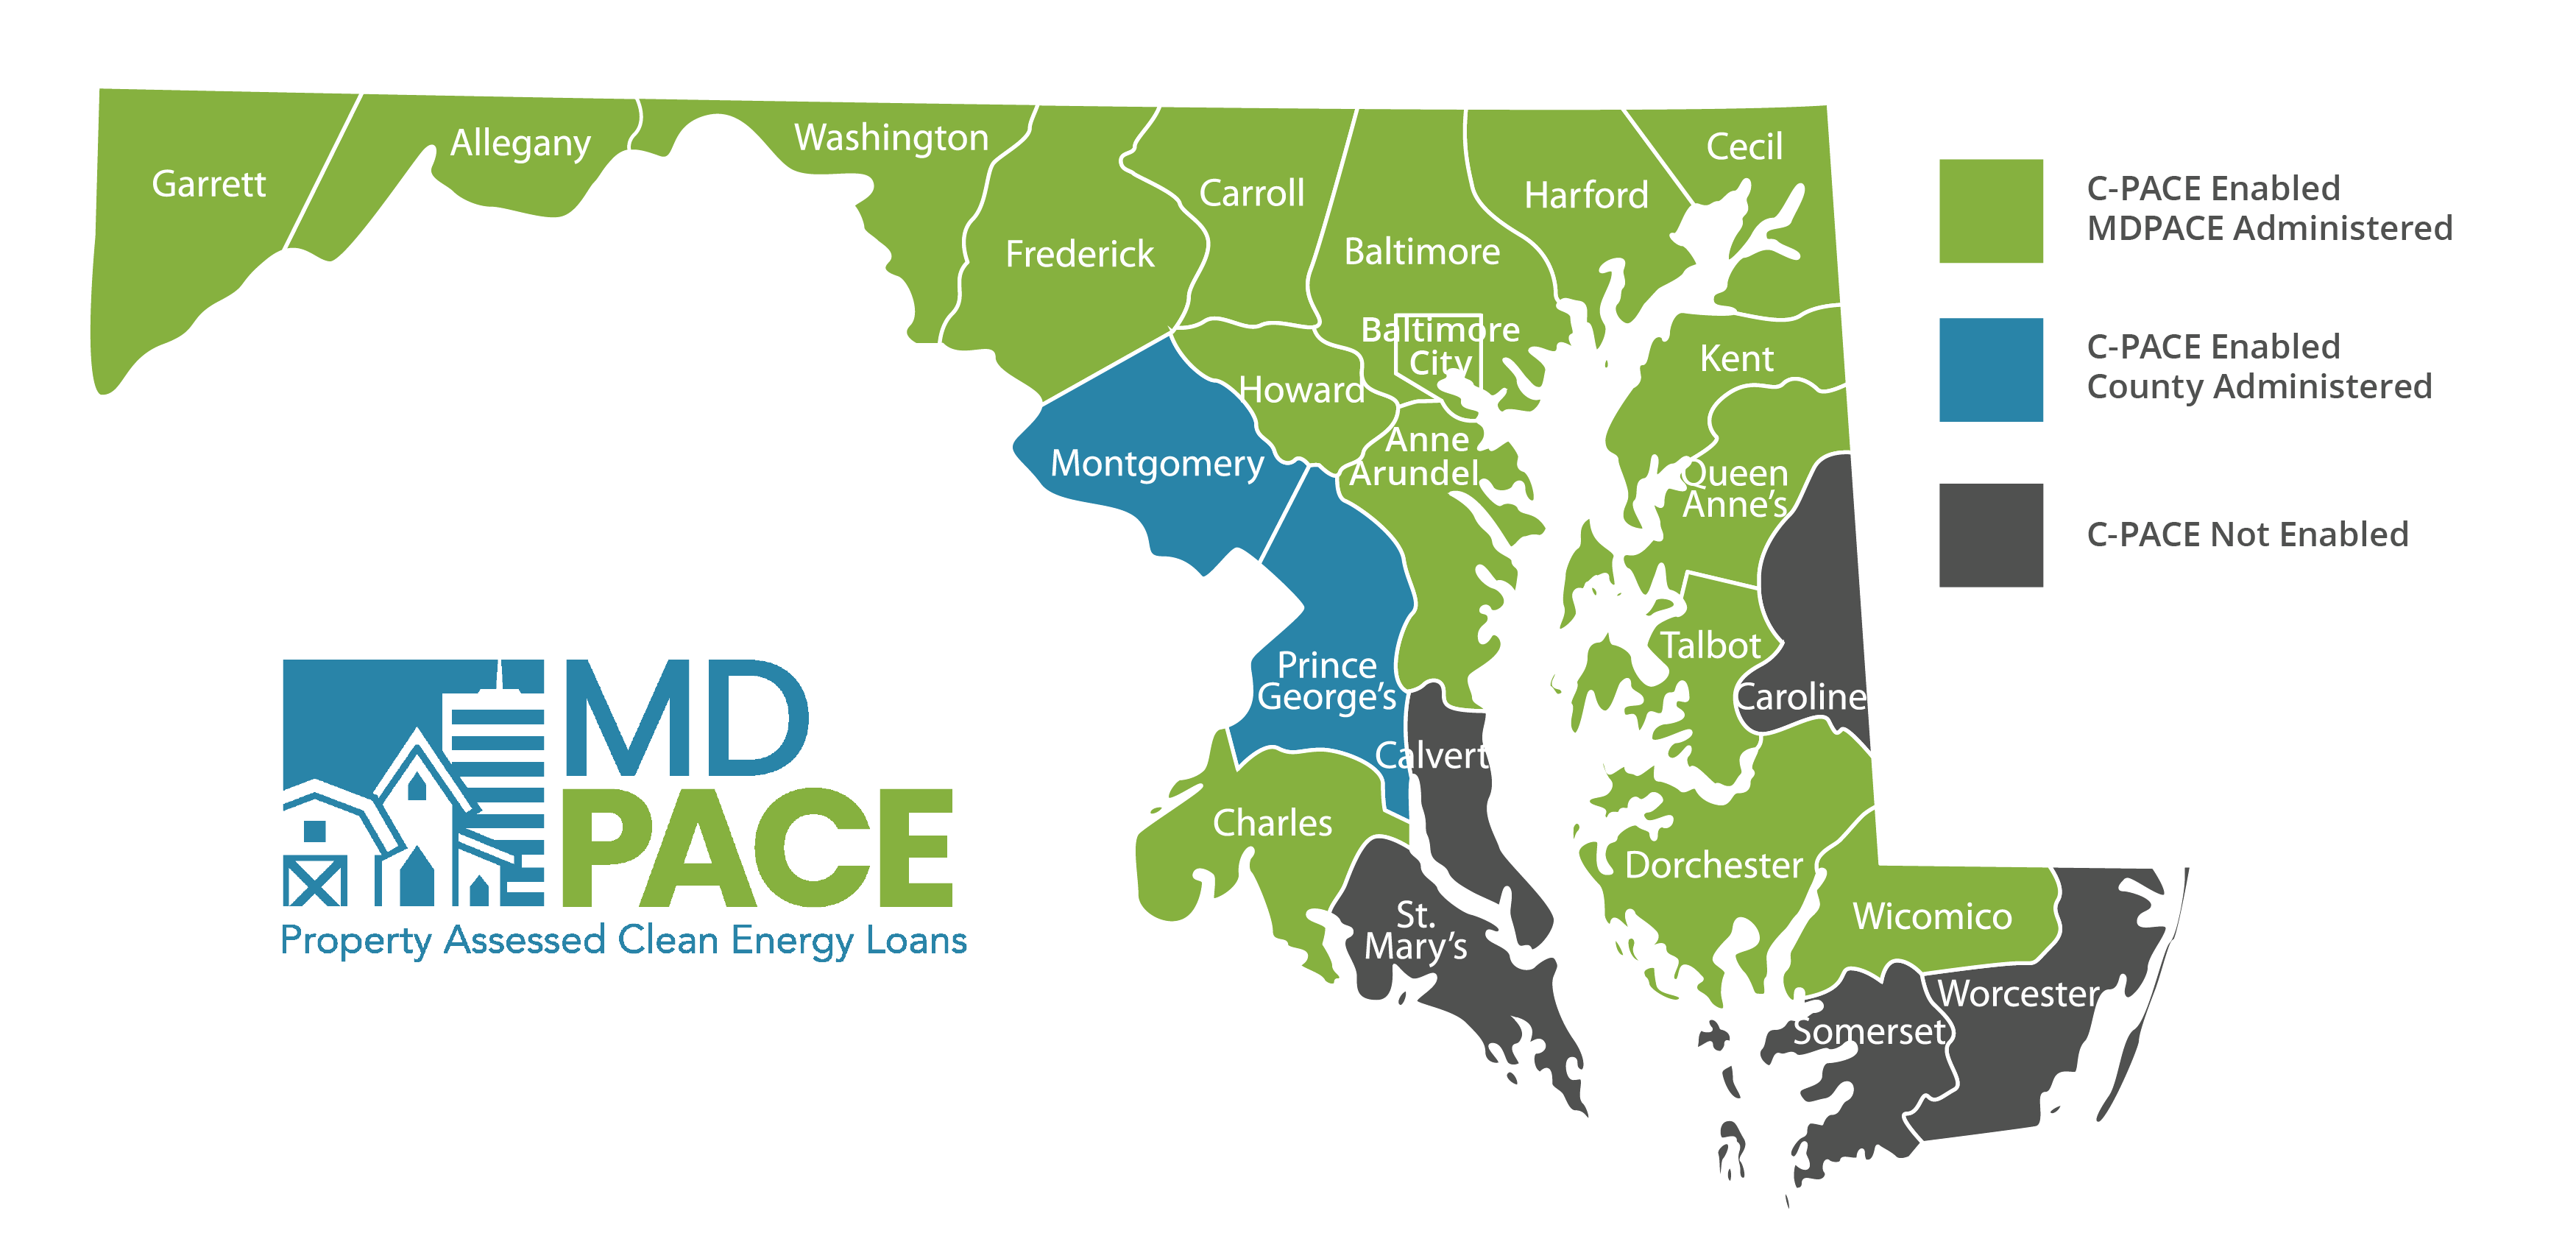 Map for MDPACE Jurisdictions